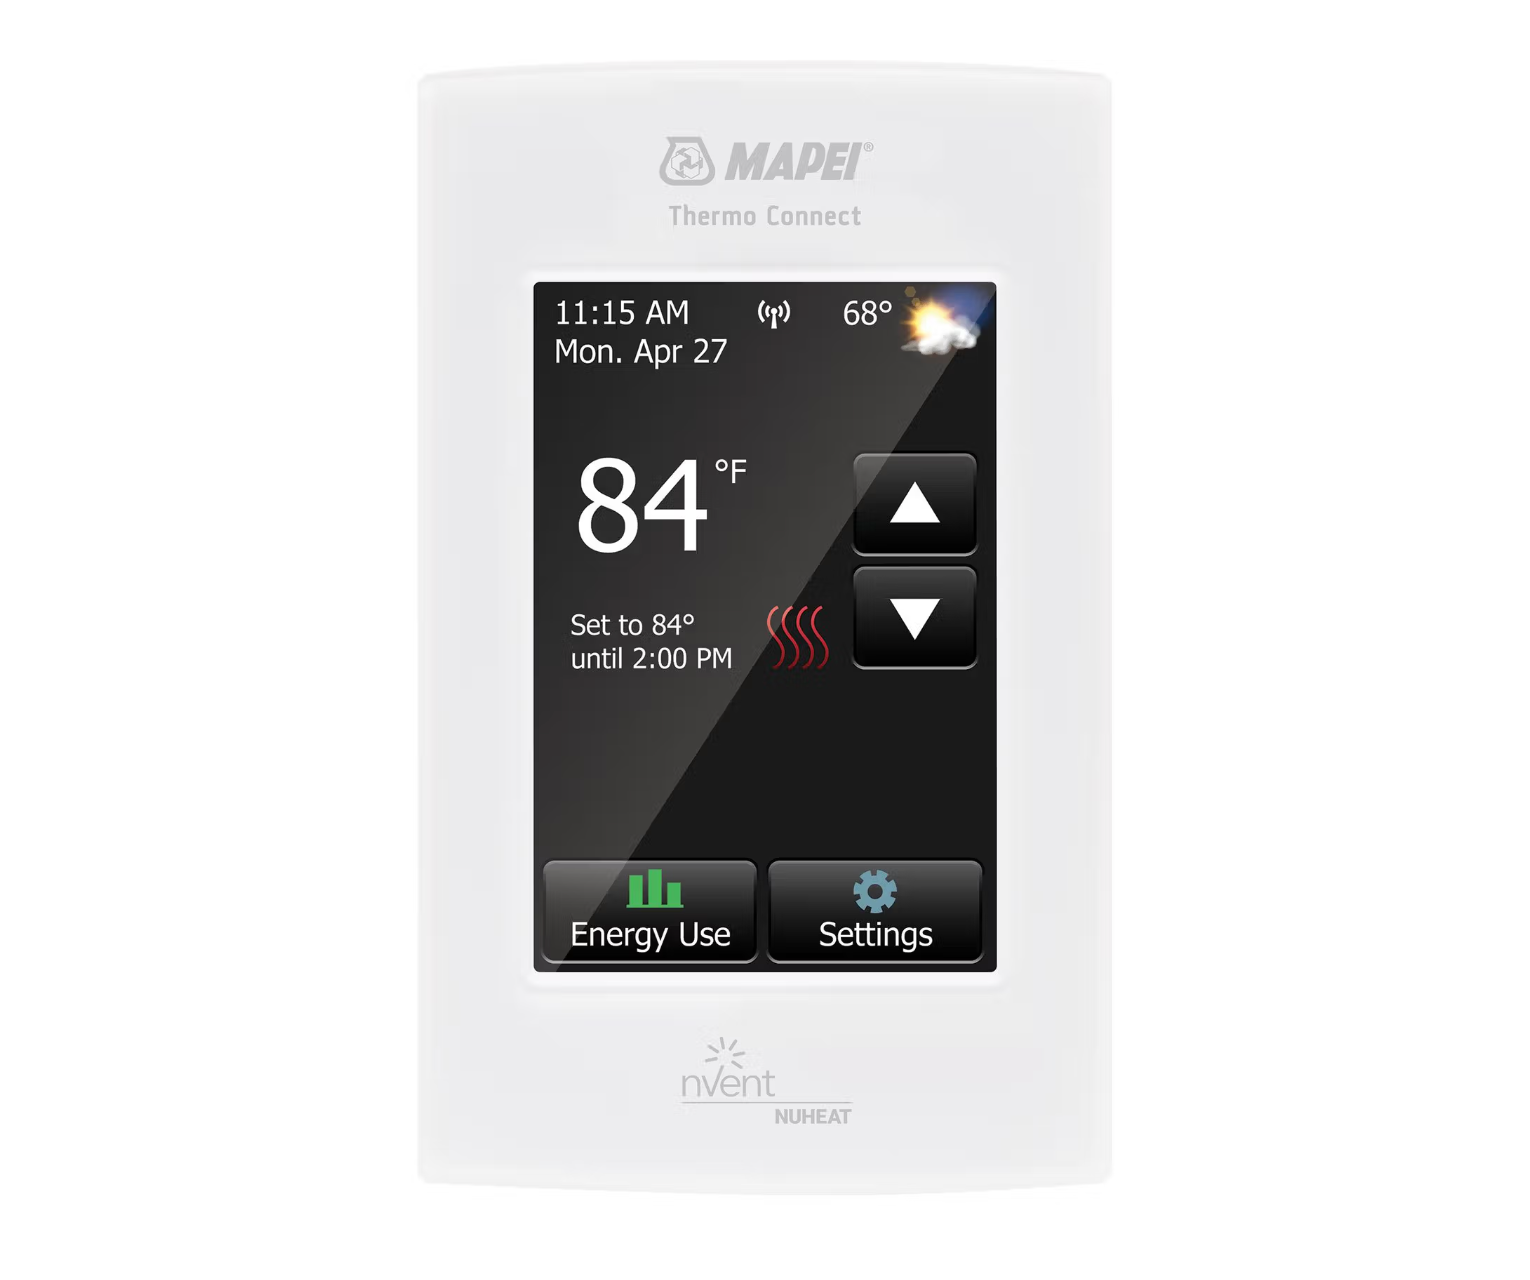 Mapei Mapeheat Thermo Connect Thermostat plancher chauffant programmable avec technologie Wi-Fi (SKU: 2855301)